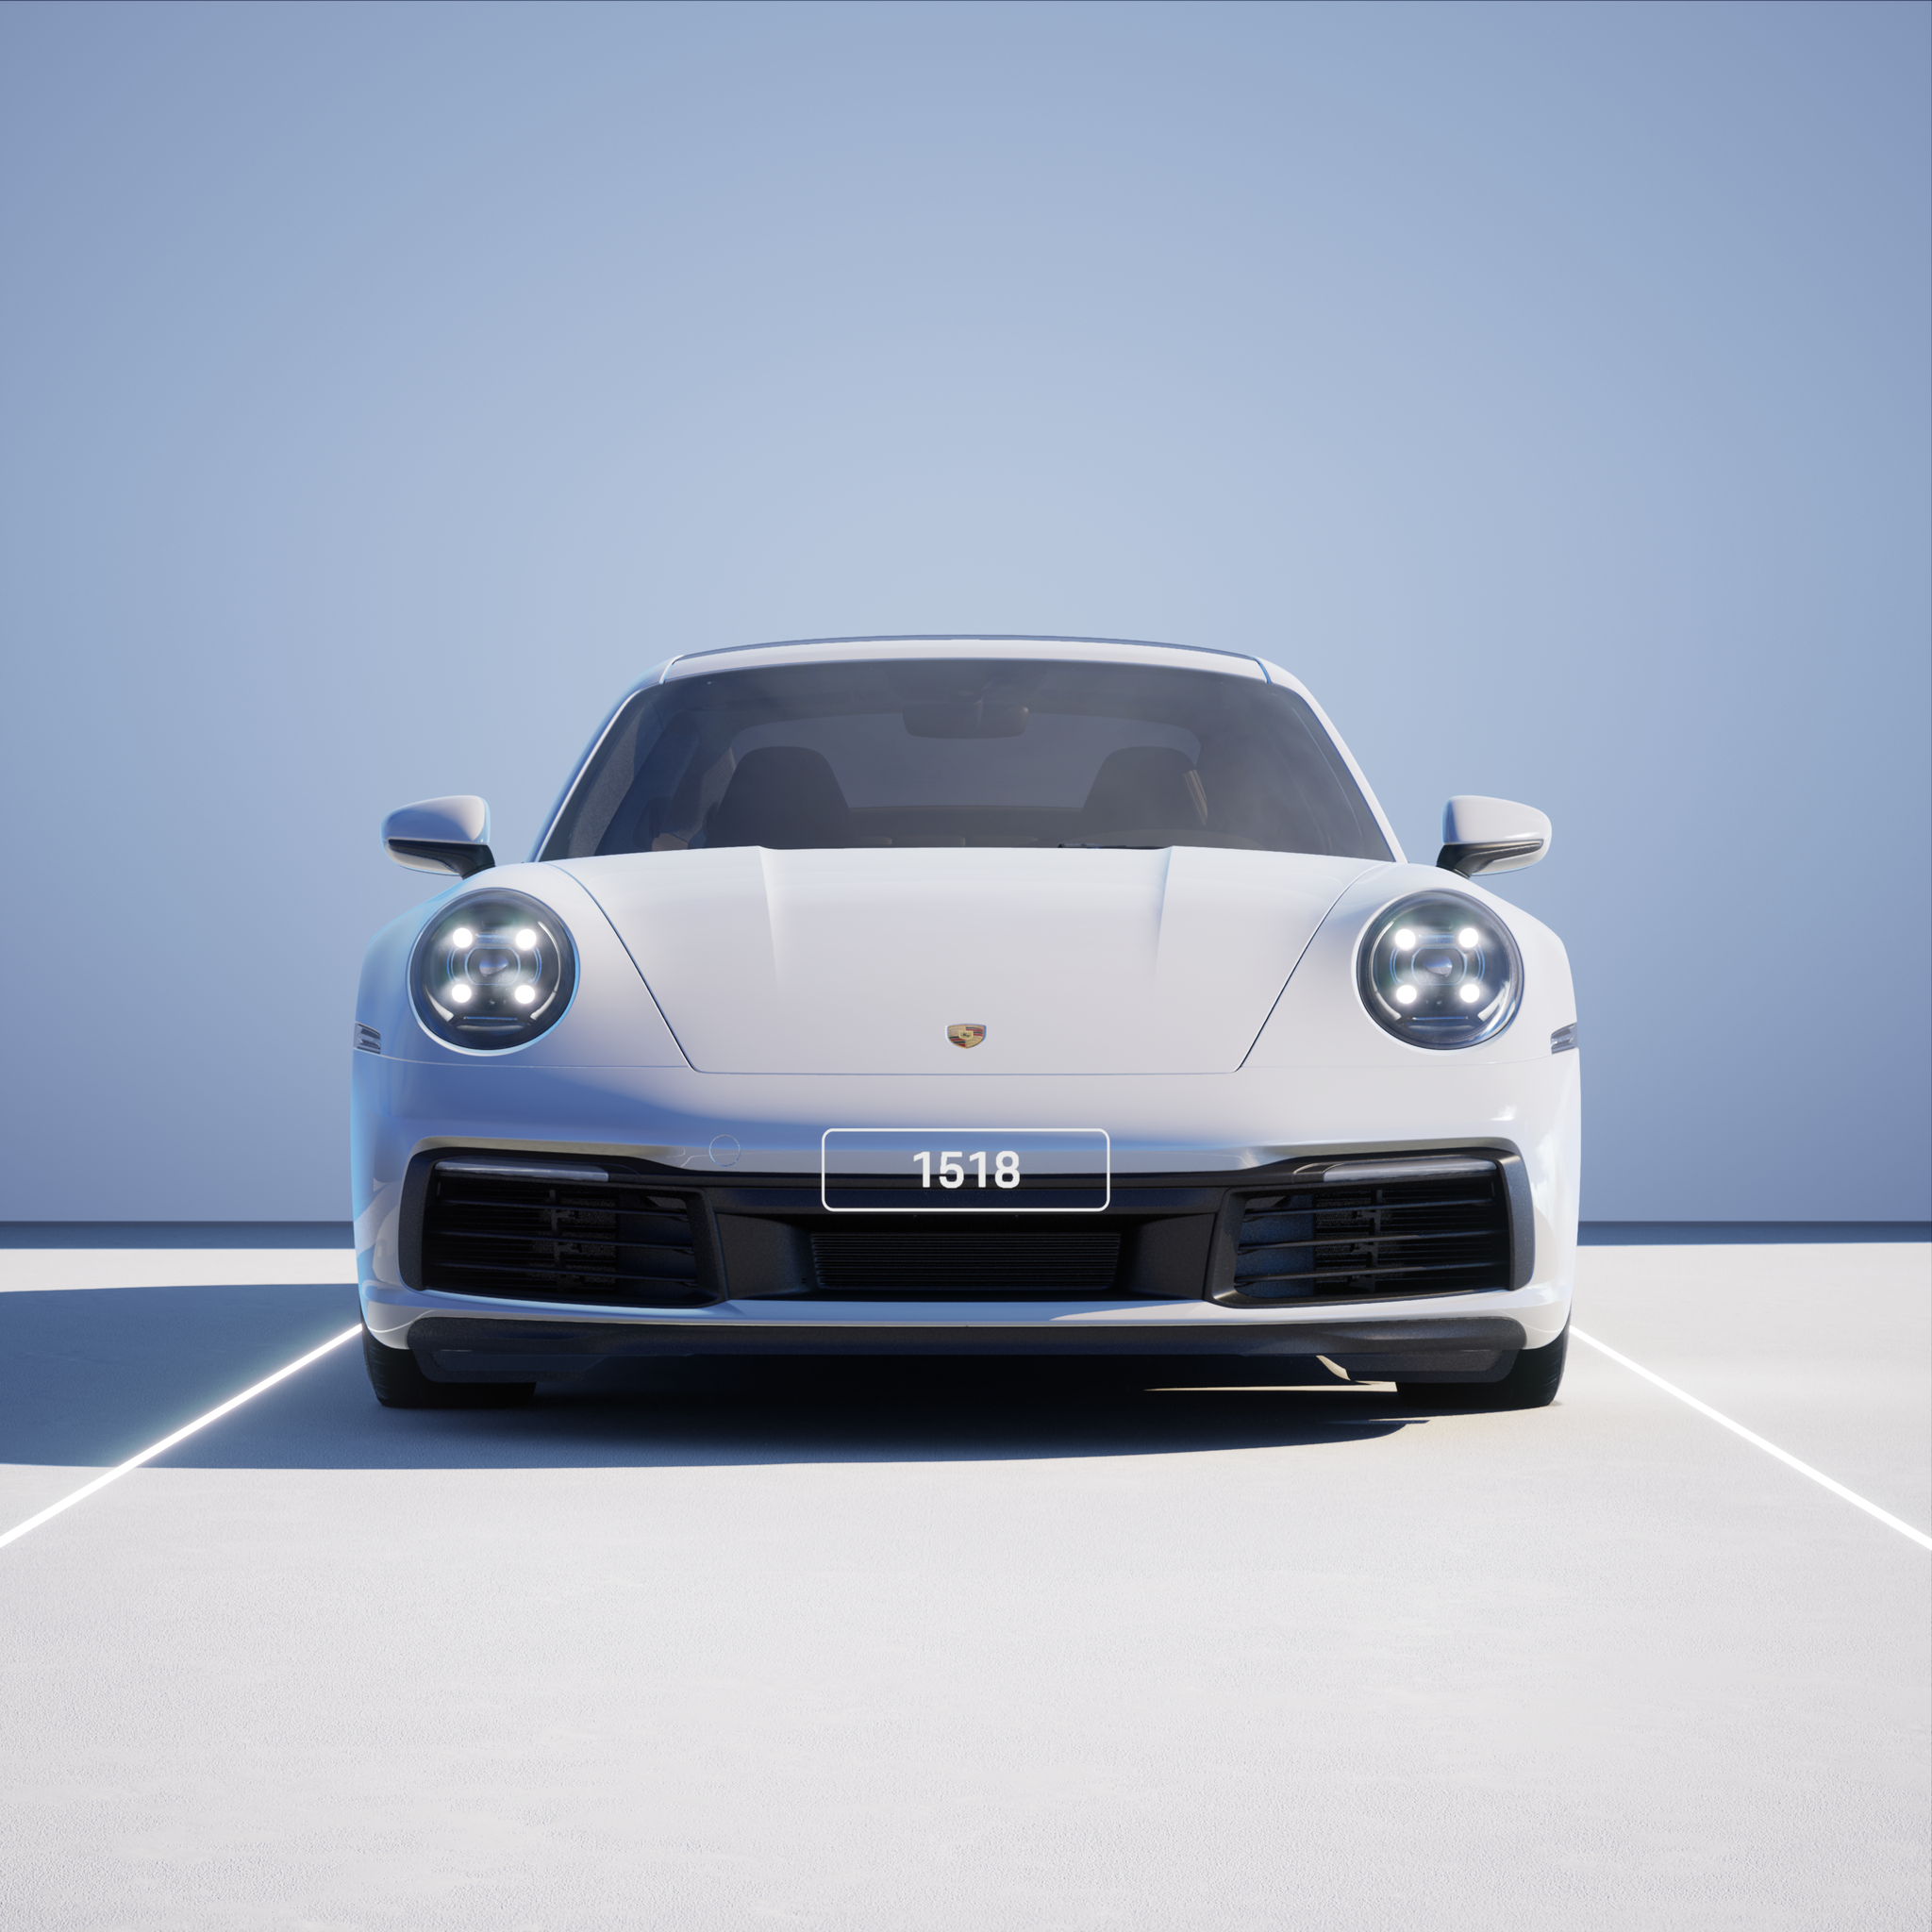 The PORSCHΞ 911 1518 image in phase